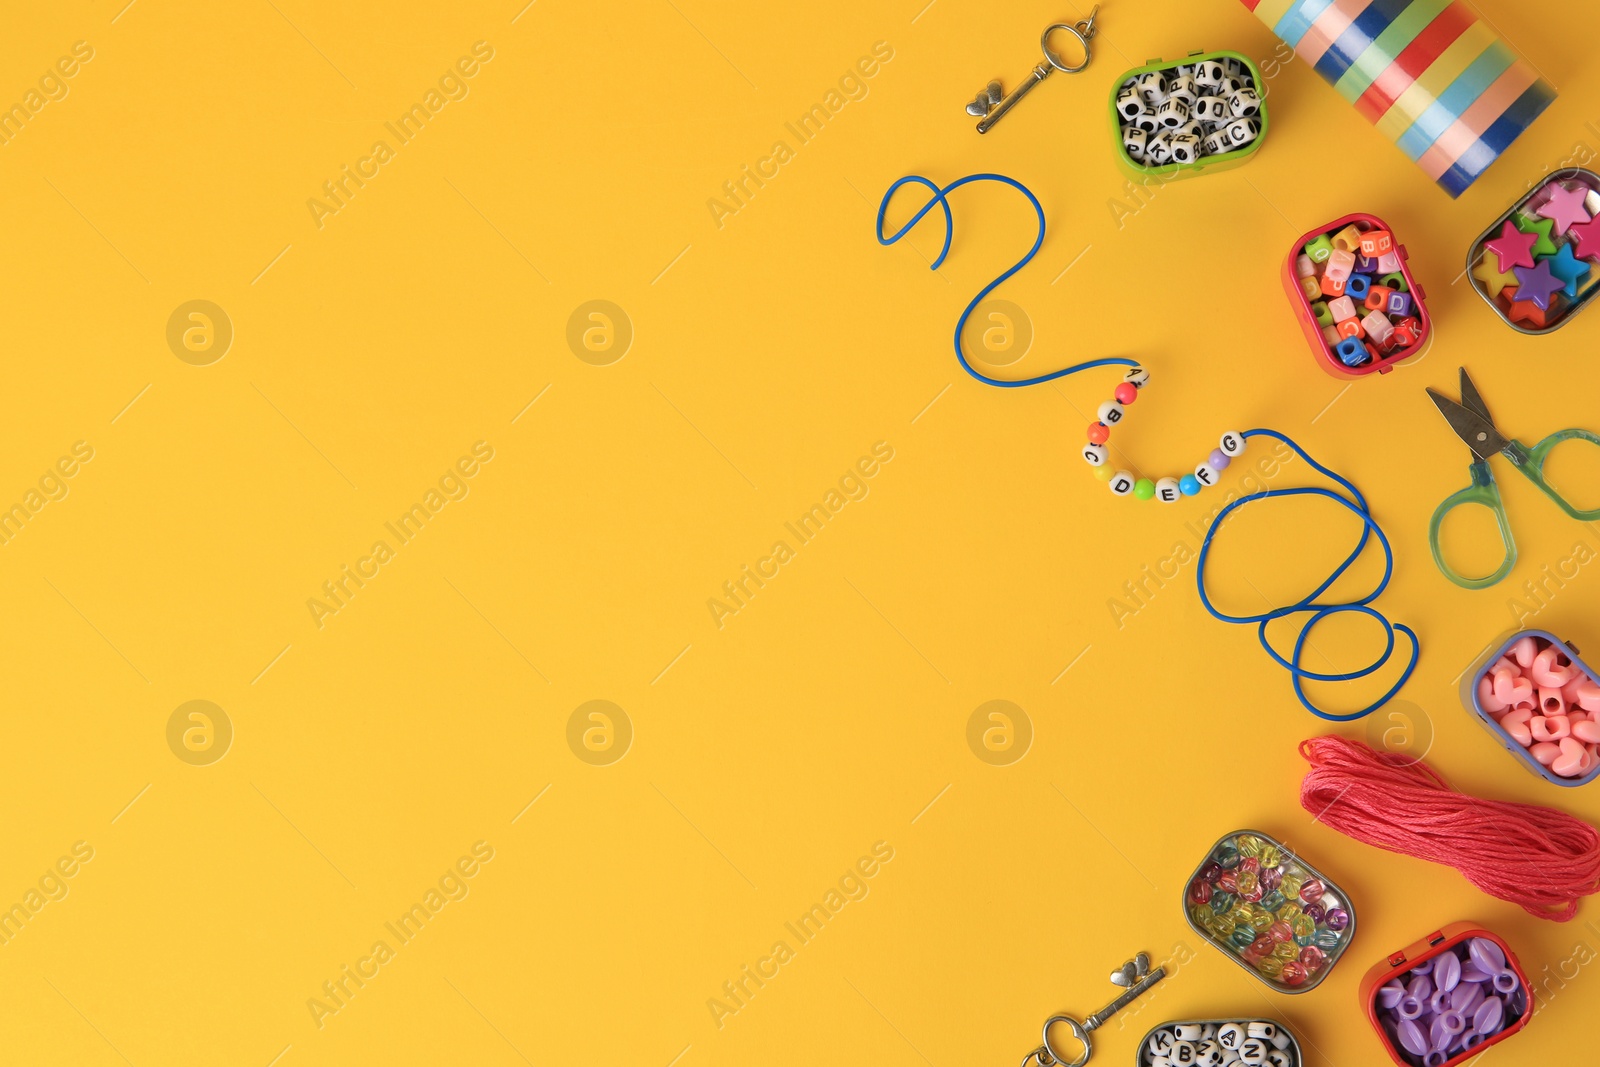 Photo of Kid`s handmade jewelry kit. Colorful beads, bracelet and different supplies on orange background, flat lay. Space for text